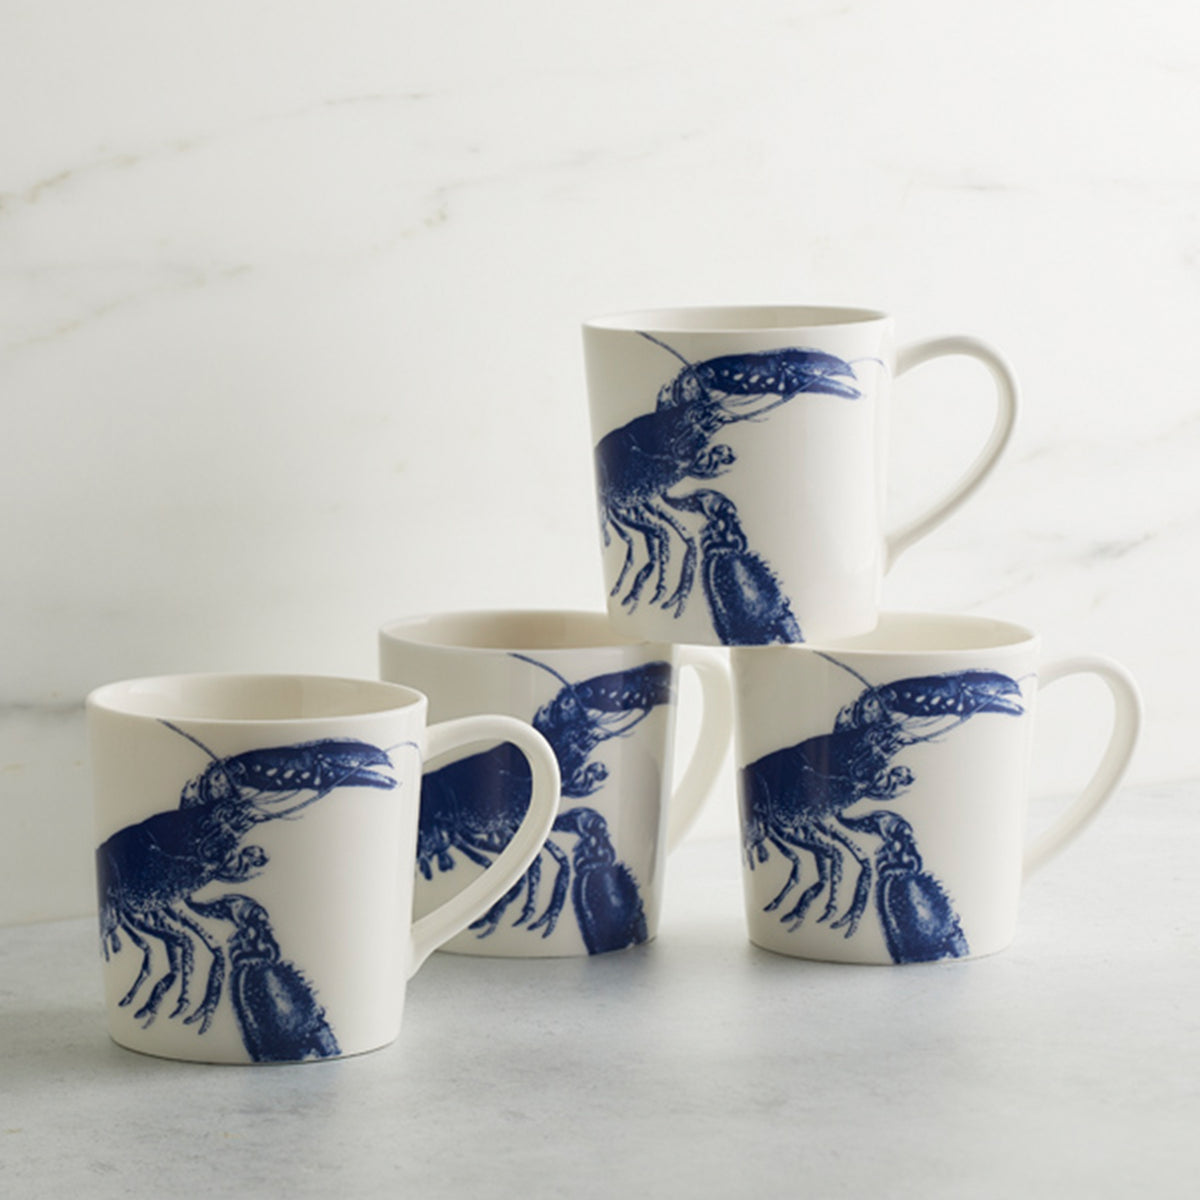 Four white high-fired porcelain Lobster Mugs from Caskata Artisanal Home with blue illustrations are stacked in a pyramid on a light-colored surface. Made in Sri Lanka, these elegant pieces add a coastal touch to any kitchen.